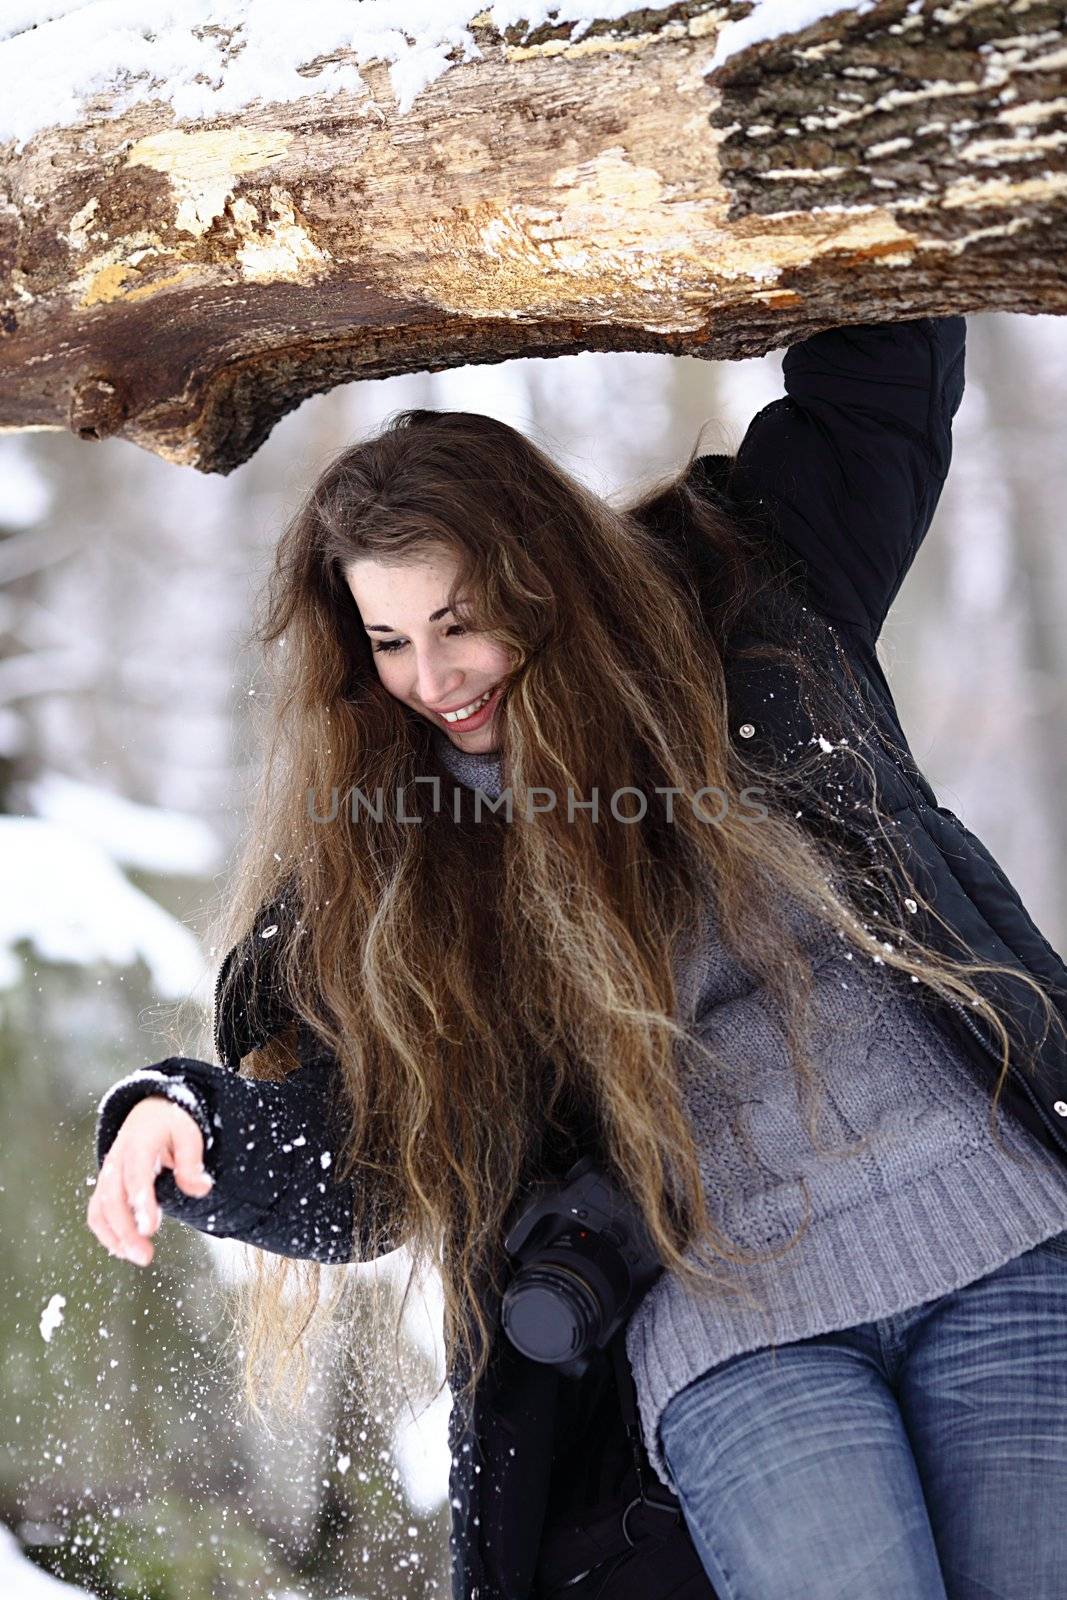 Outdoor winter portrait of a woman